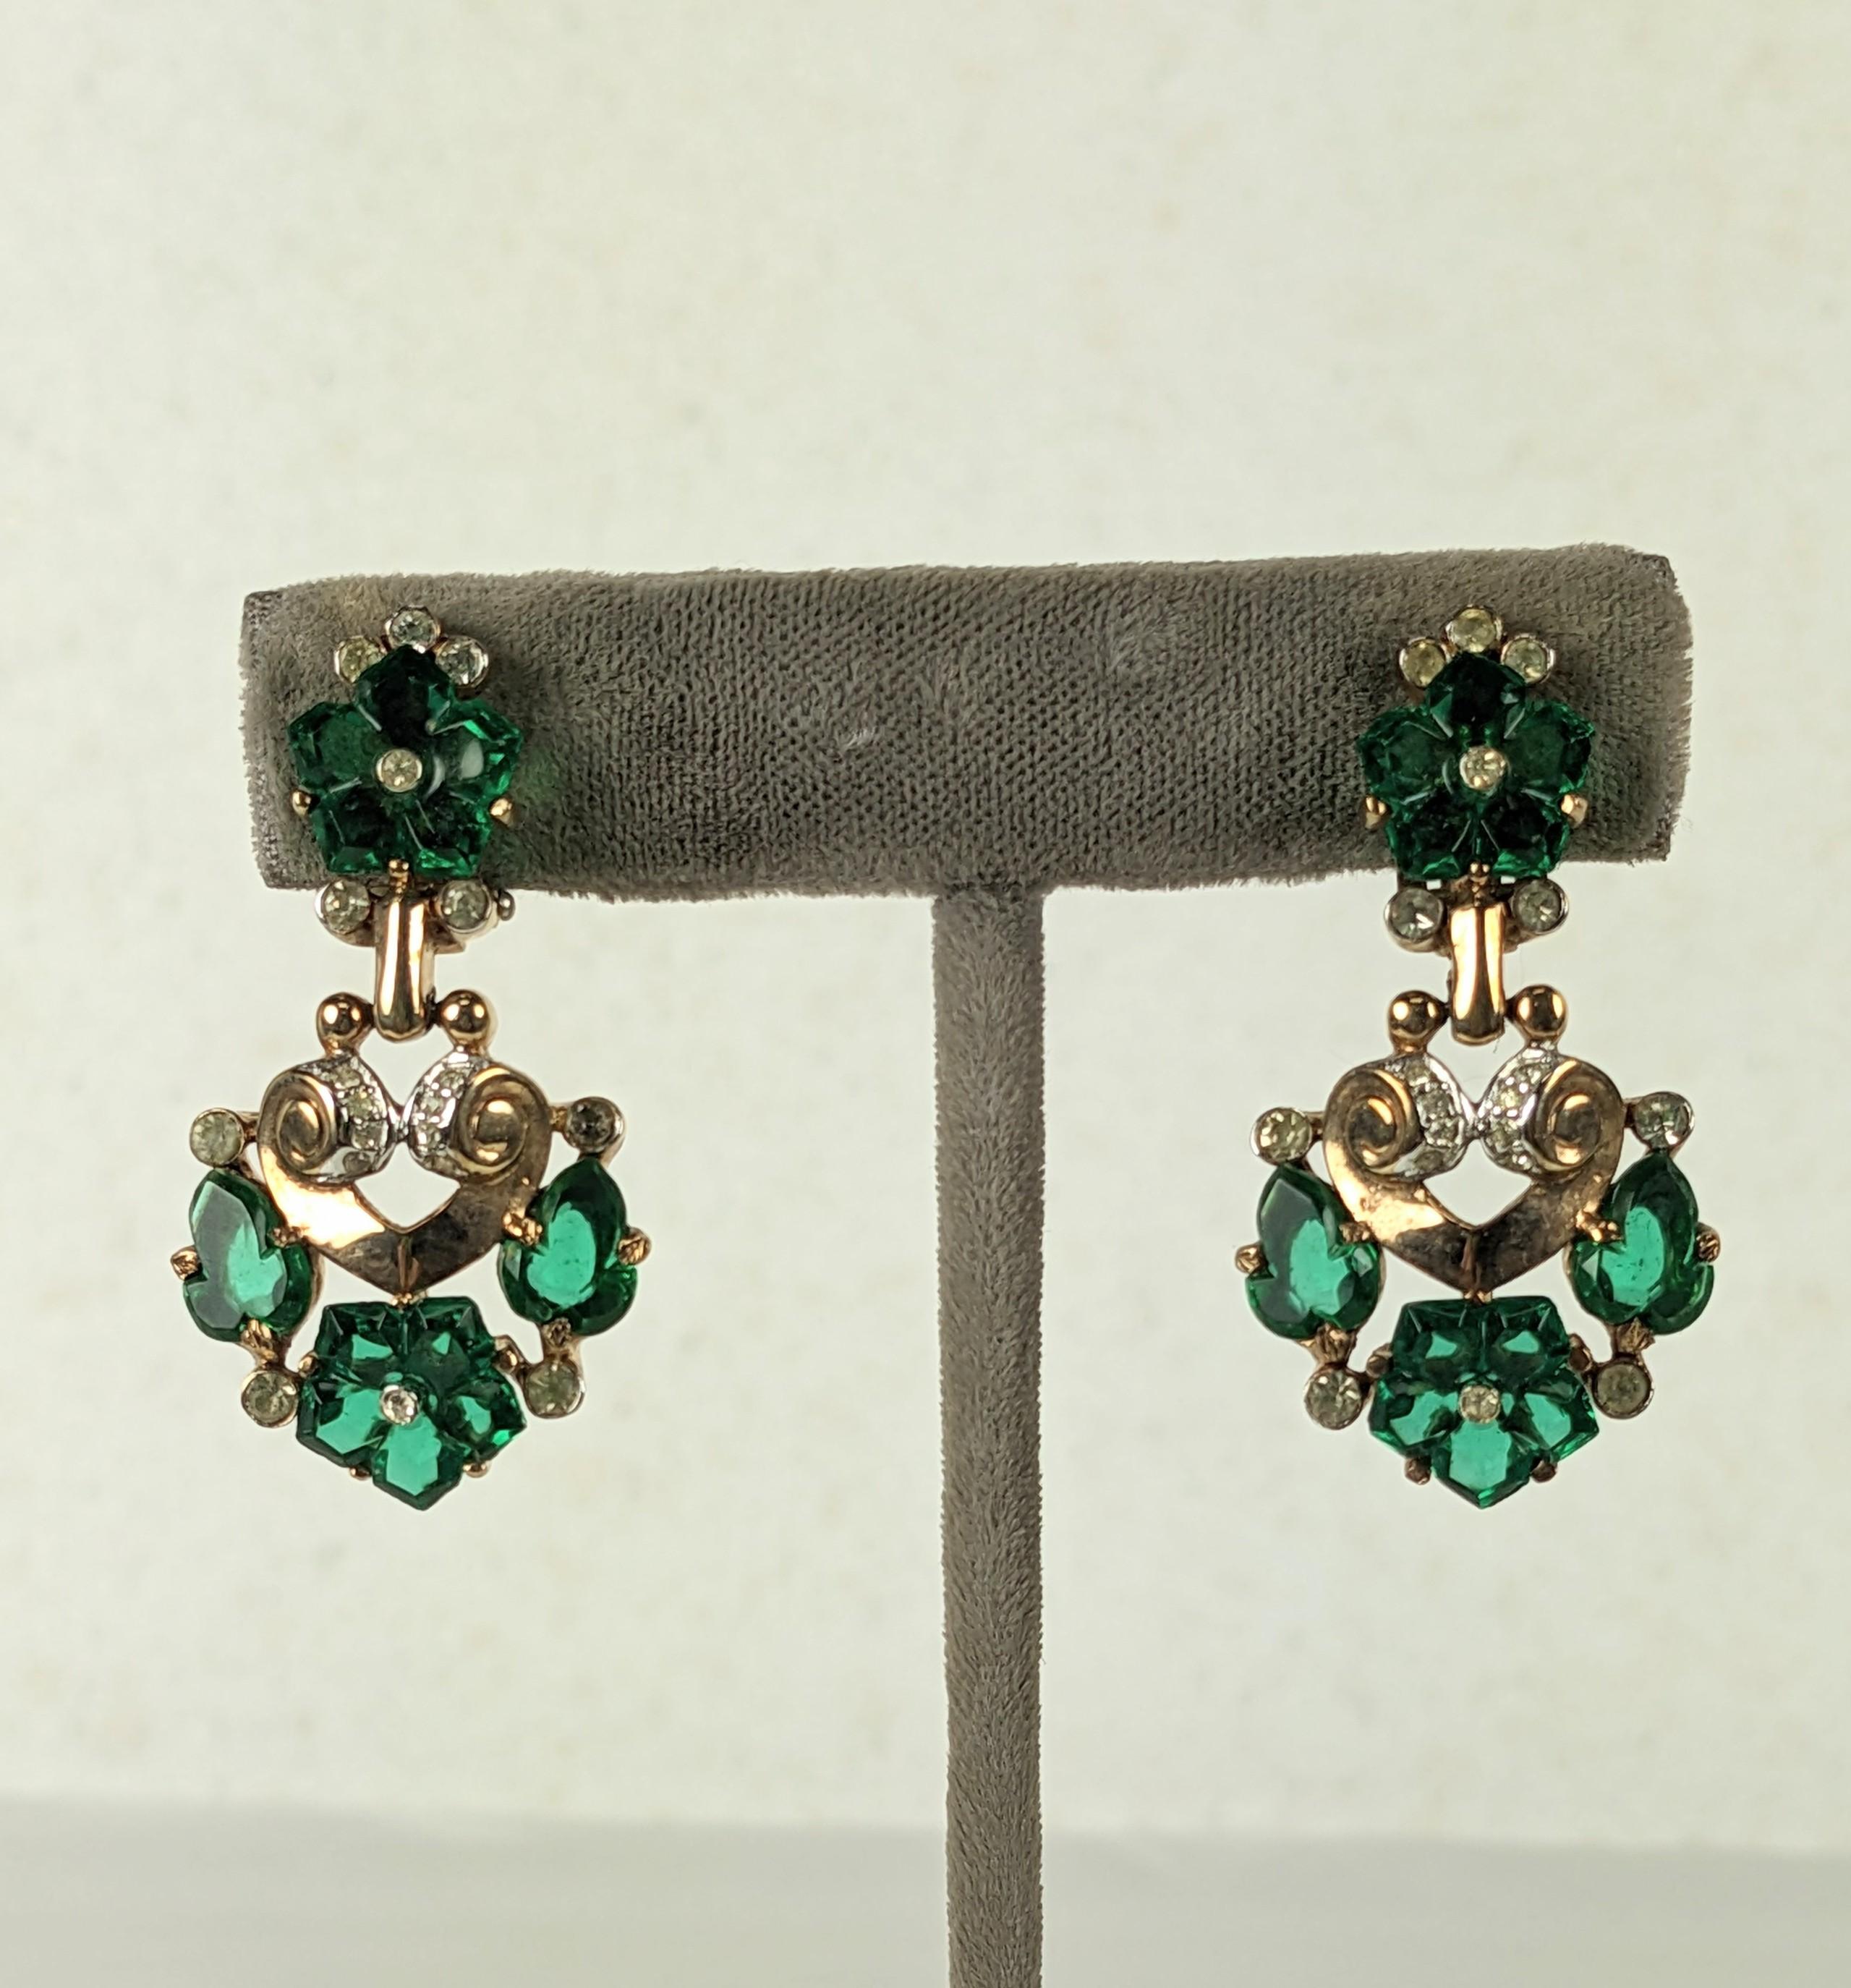 Trifari Fleur de Paris Cut Fruit Salad Earrings of faceted faux emerald flowers within a pave and gilt metal articulated setting by Alfred Phillipe.
1950's USA, 1.5